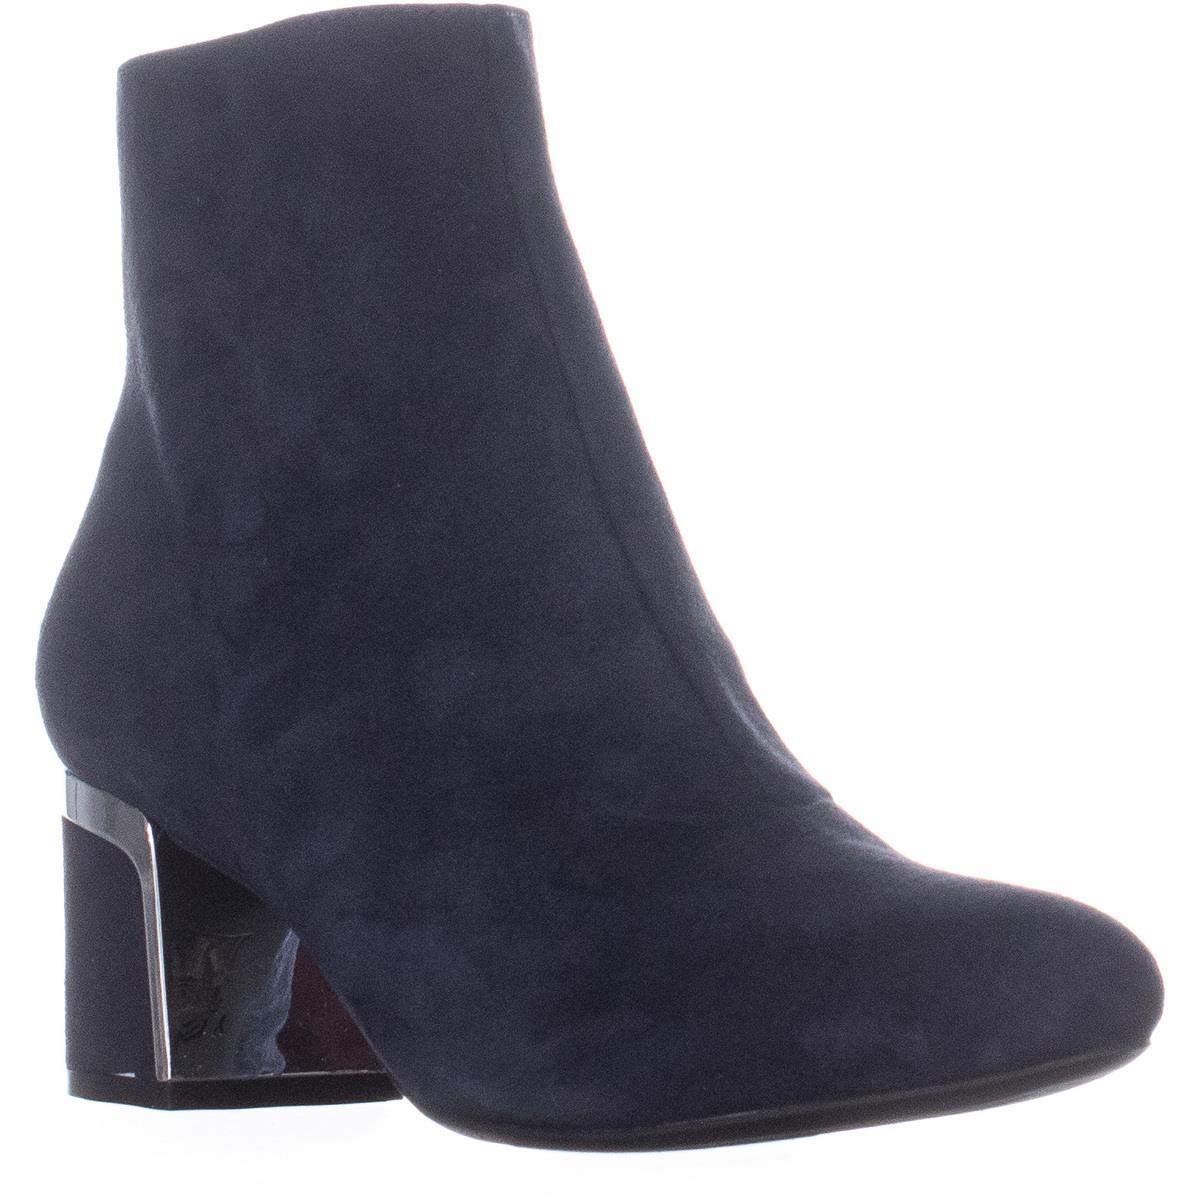 DKNY Womens Corrie Suede Pointed Toe Ankle Fashion Boots, Blue, Size 10 ...